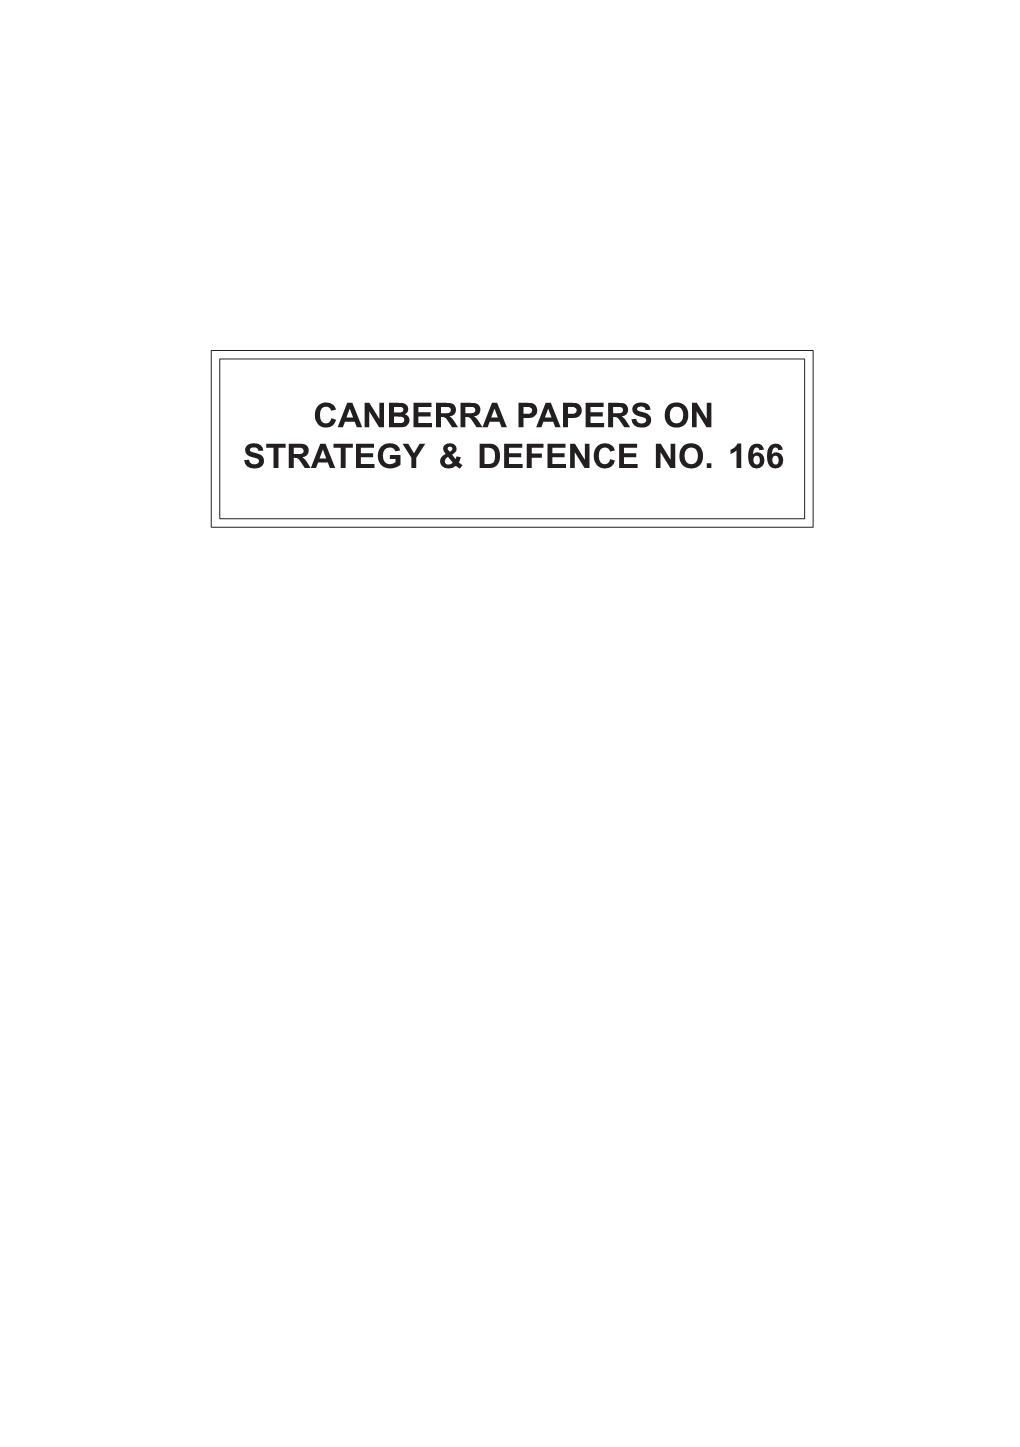 Canberra Papers on Strategy & Defence No